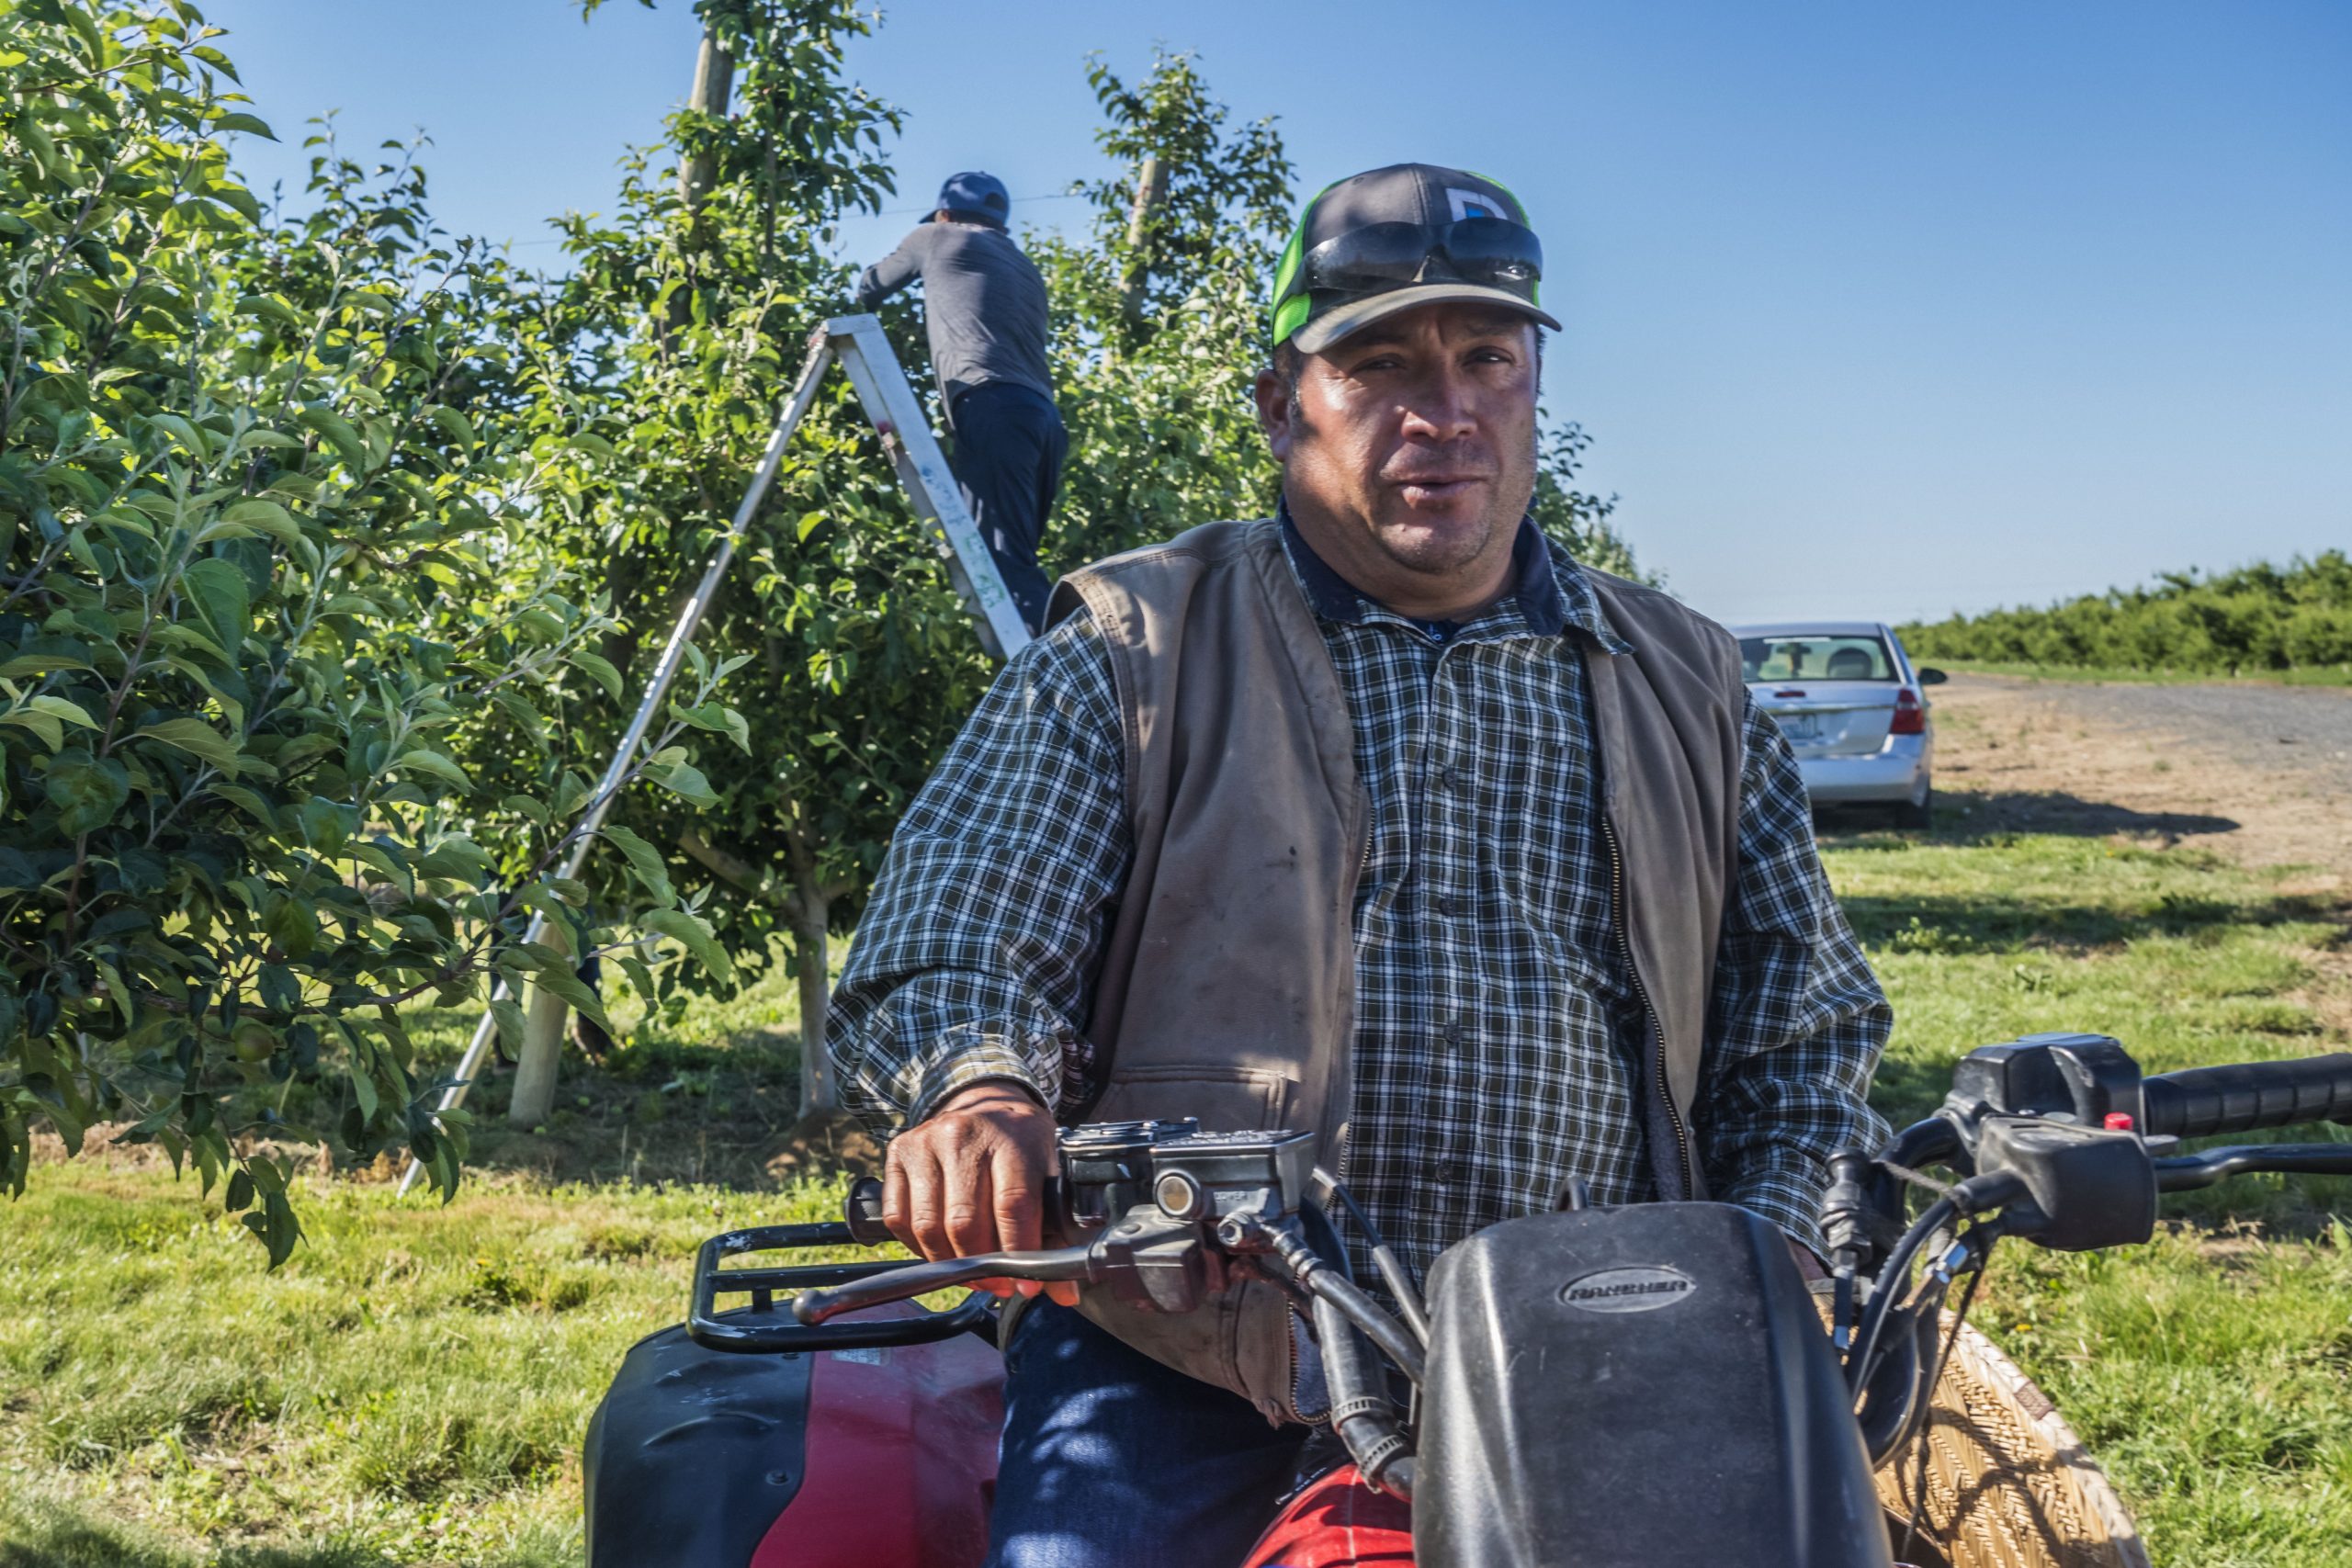 Farmworkers thin apples on trees in a Washington State apple orchard. Alberto Rodriguez is the foreman of the crew Copyright David Bacon